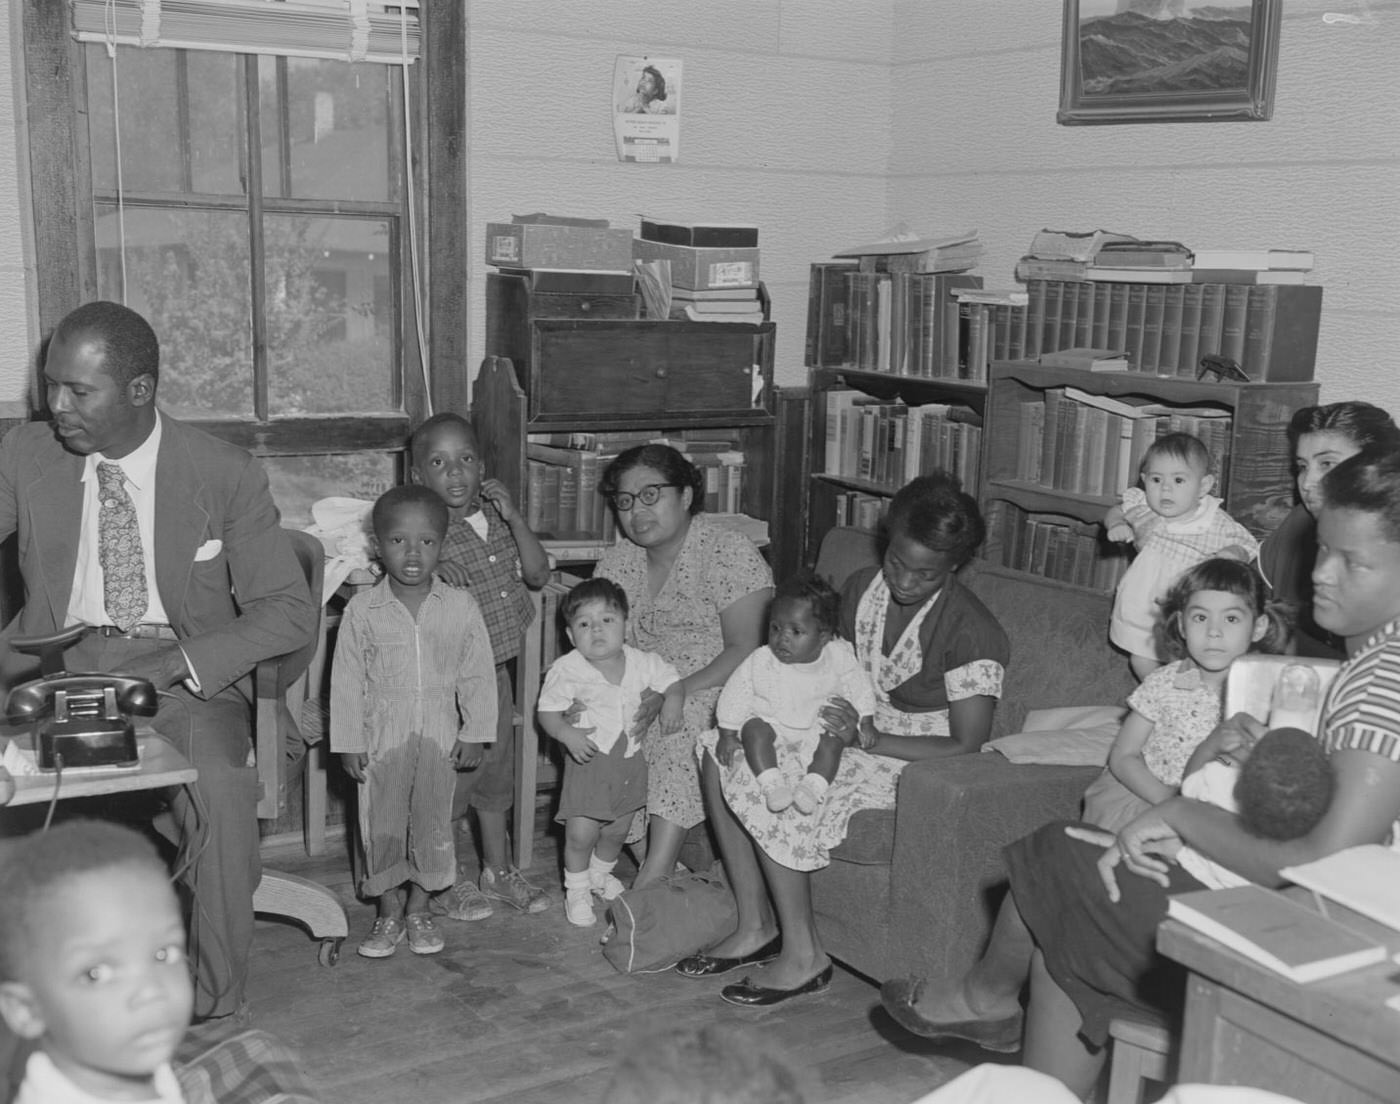 Community Center Gathering with Families and Infants, 1957.